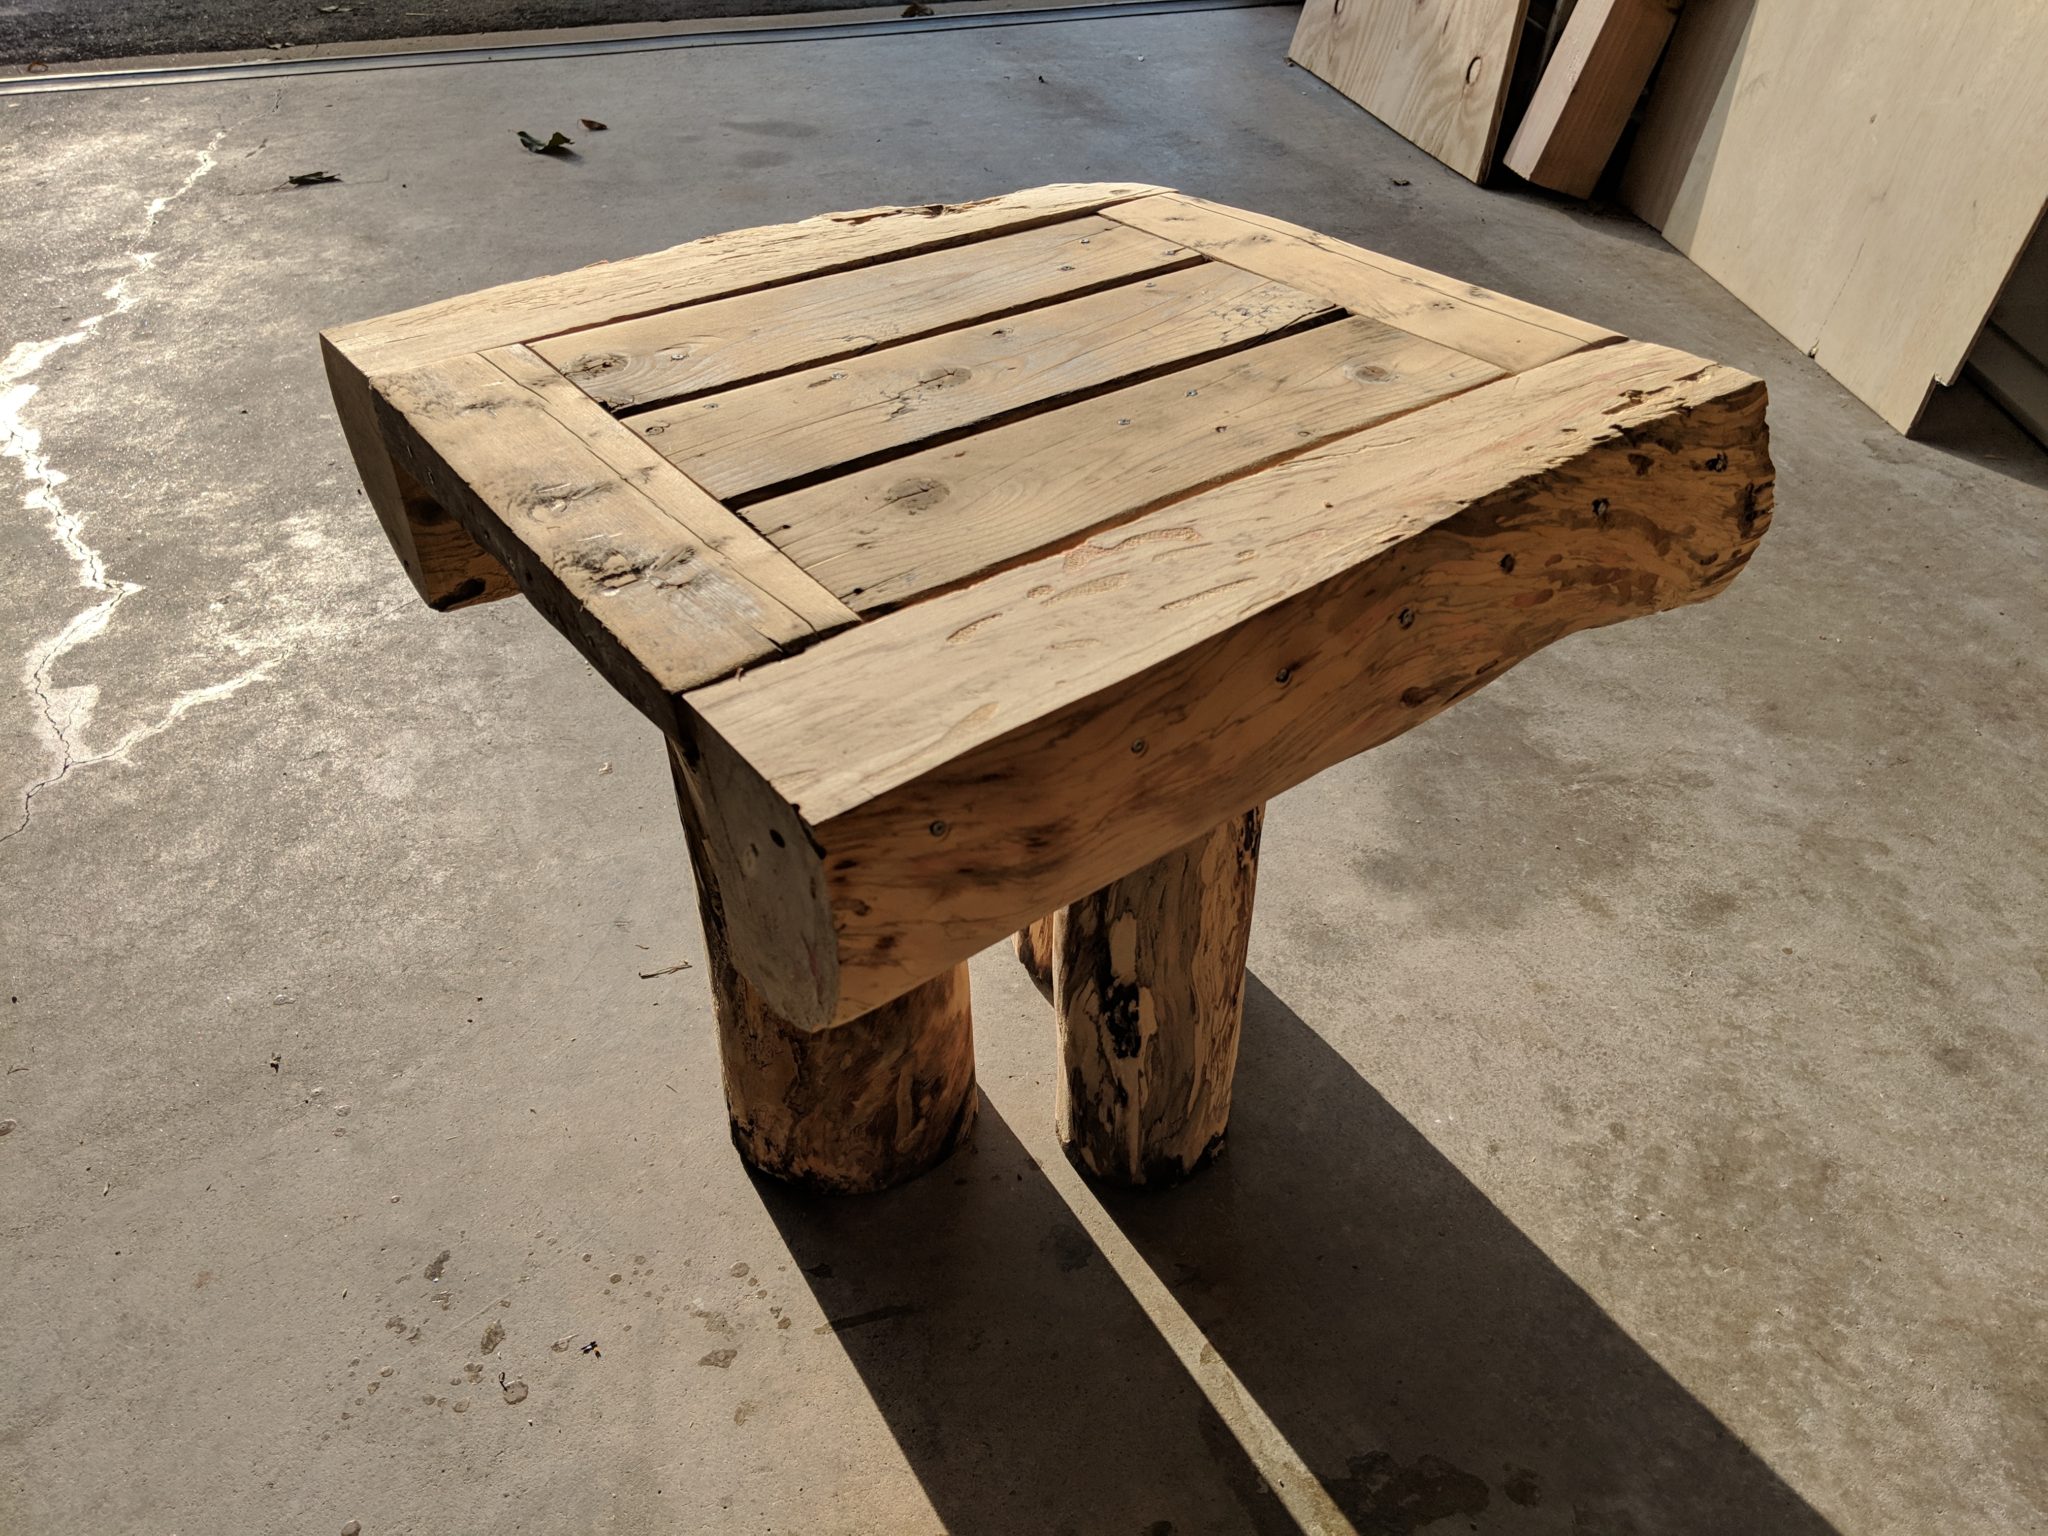 Outdoor table from scrap wood